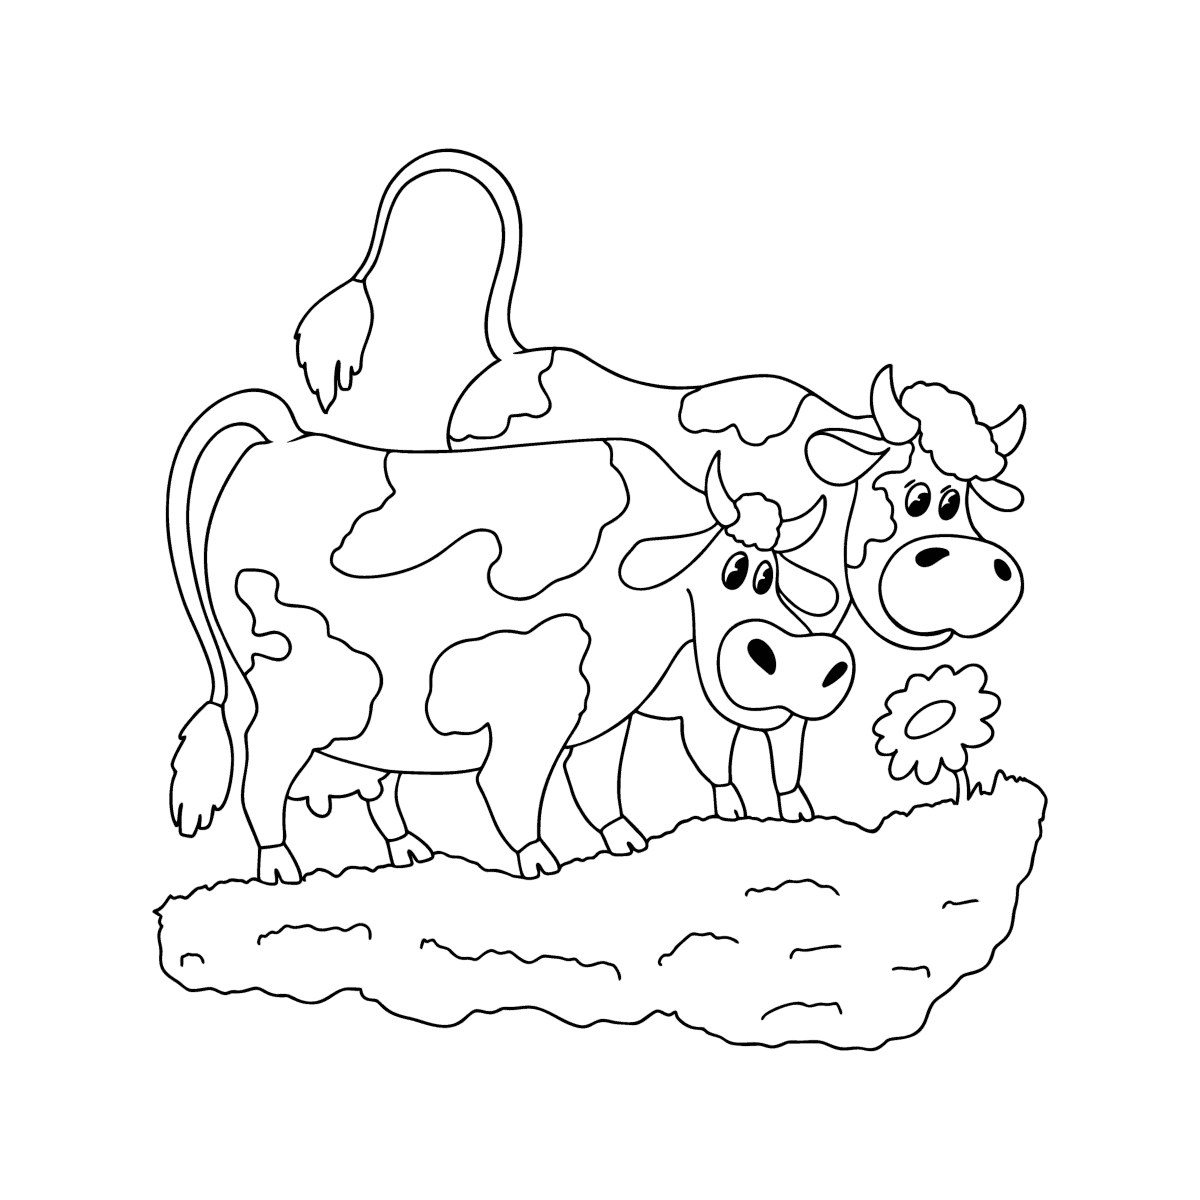 Two cows in the meadow Coloring page ♥ Online and Print for Free!